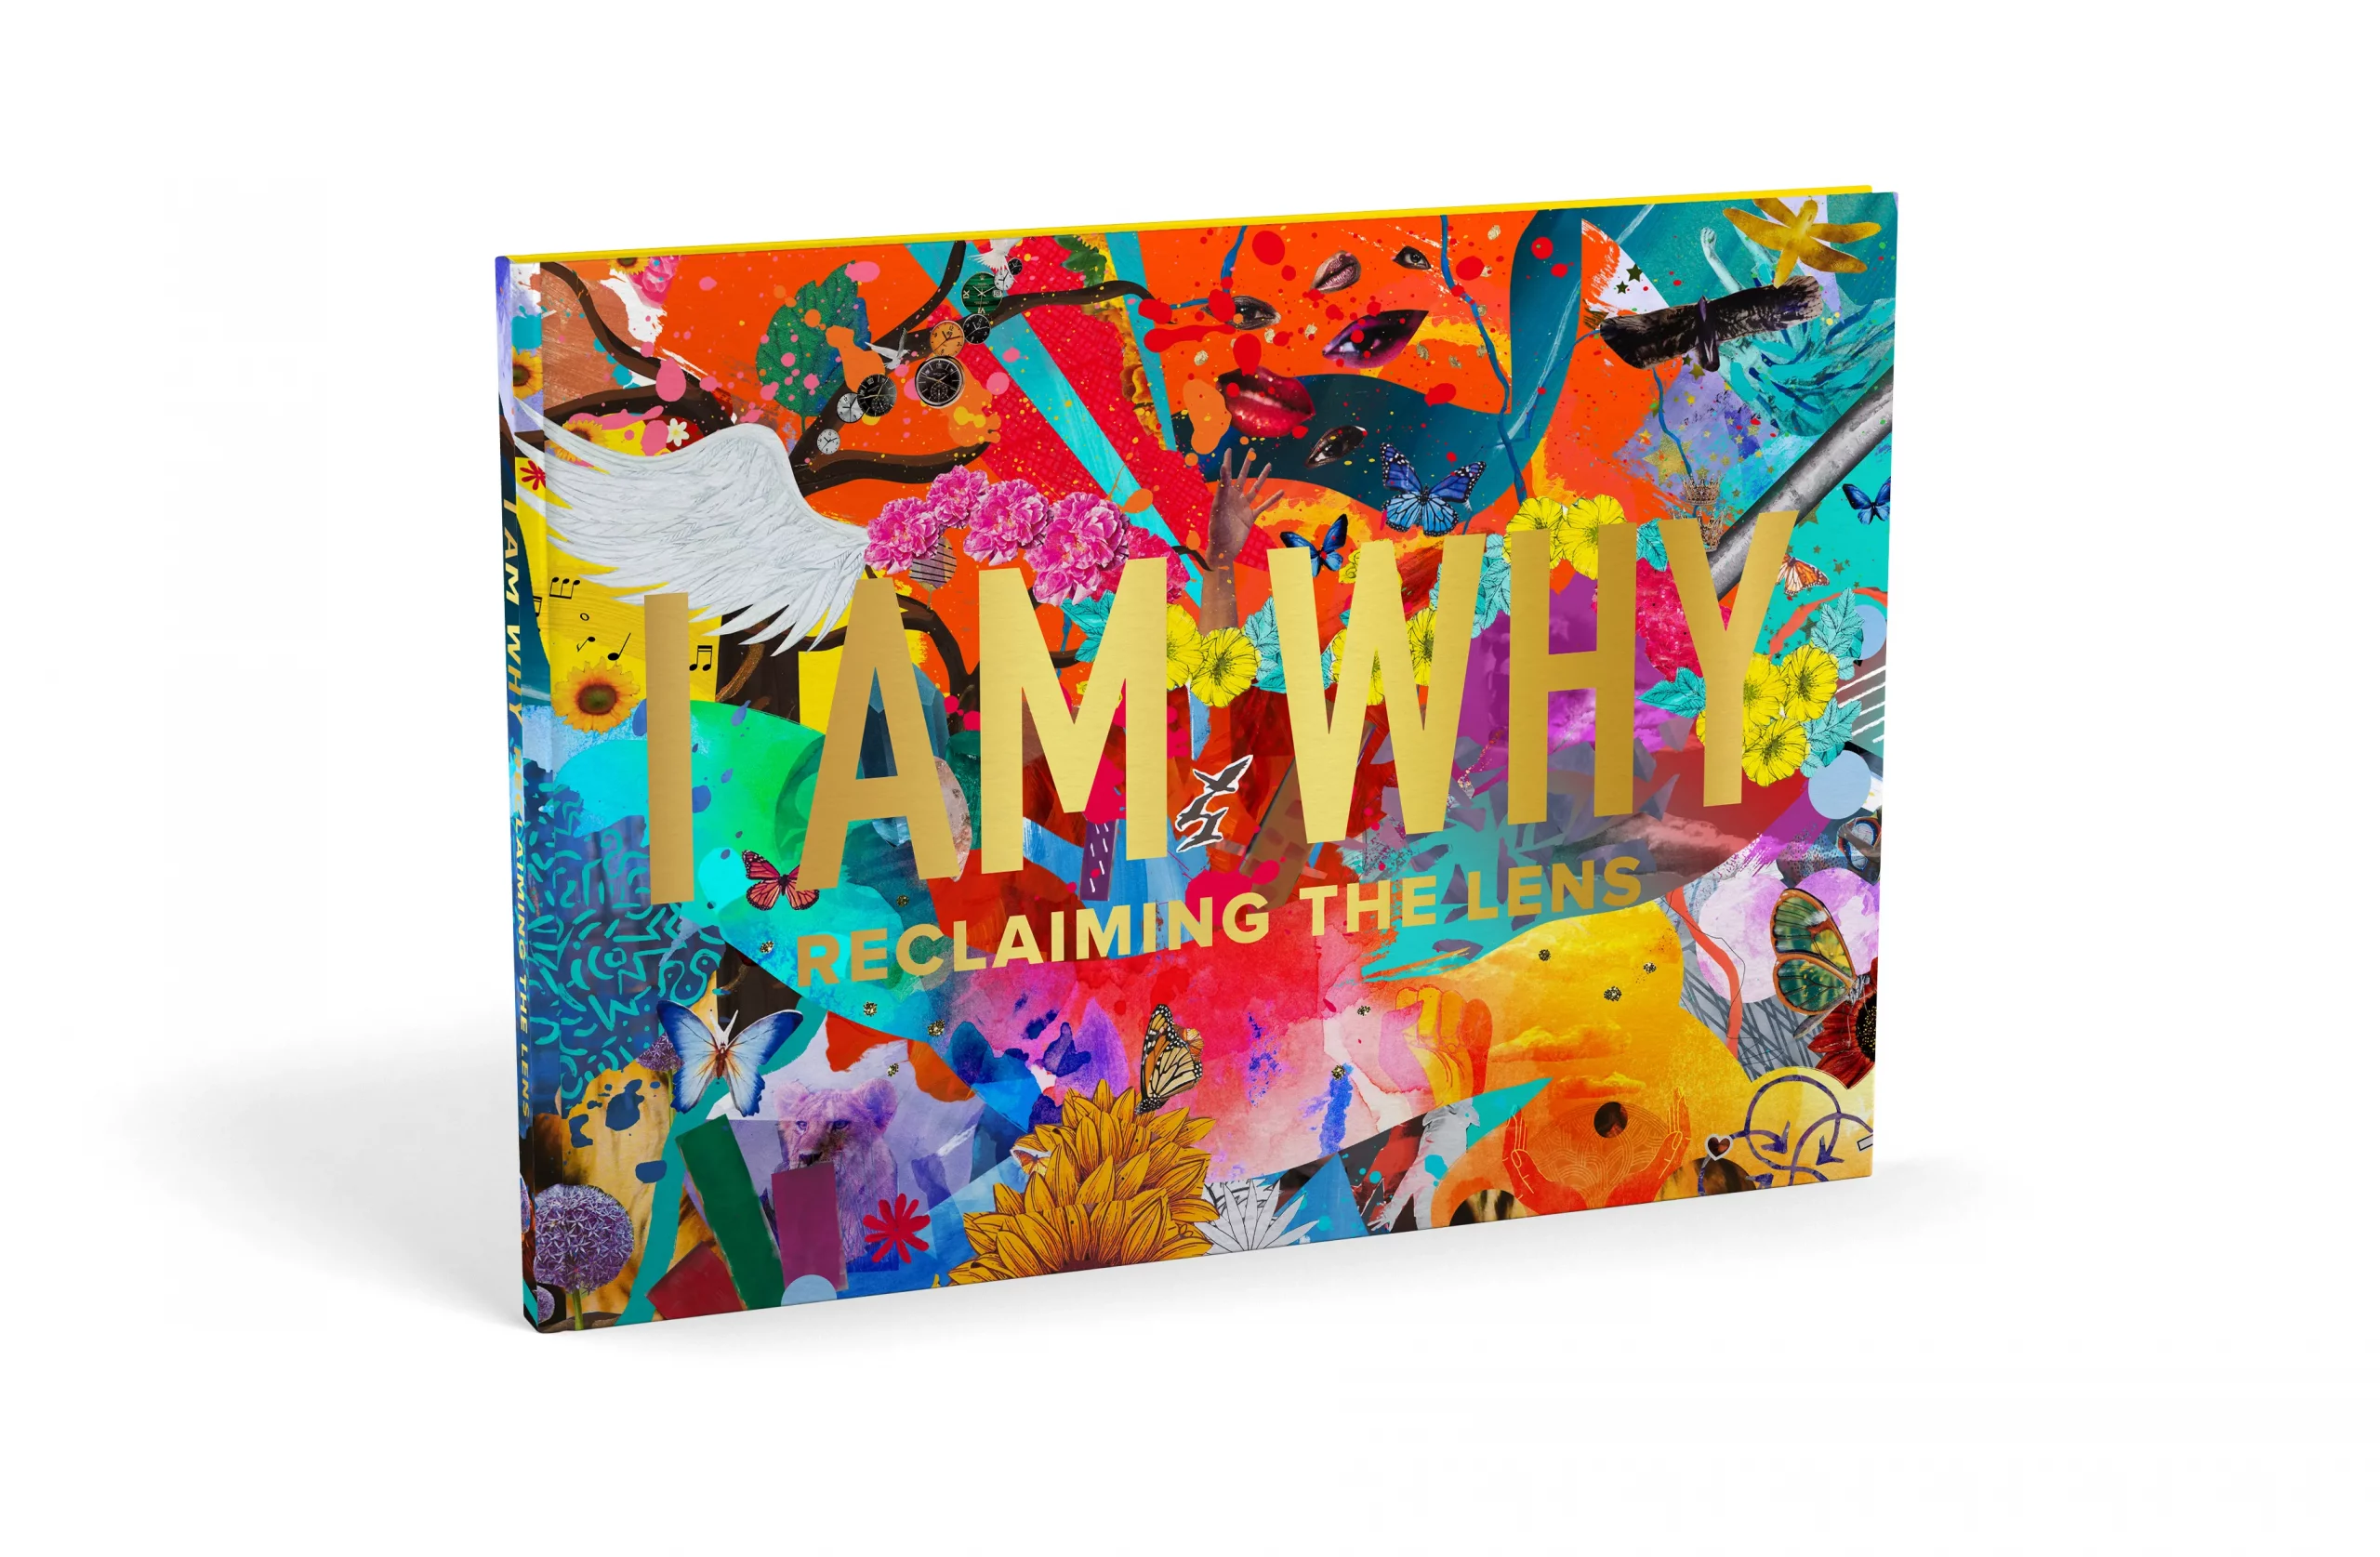 Reclaiming the Lens. The I Am Why book